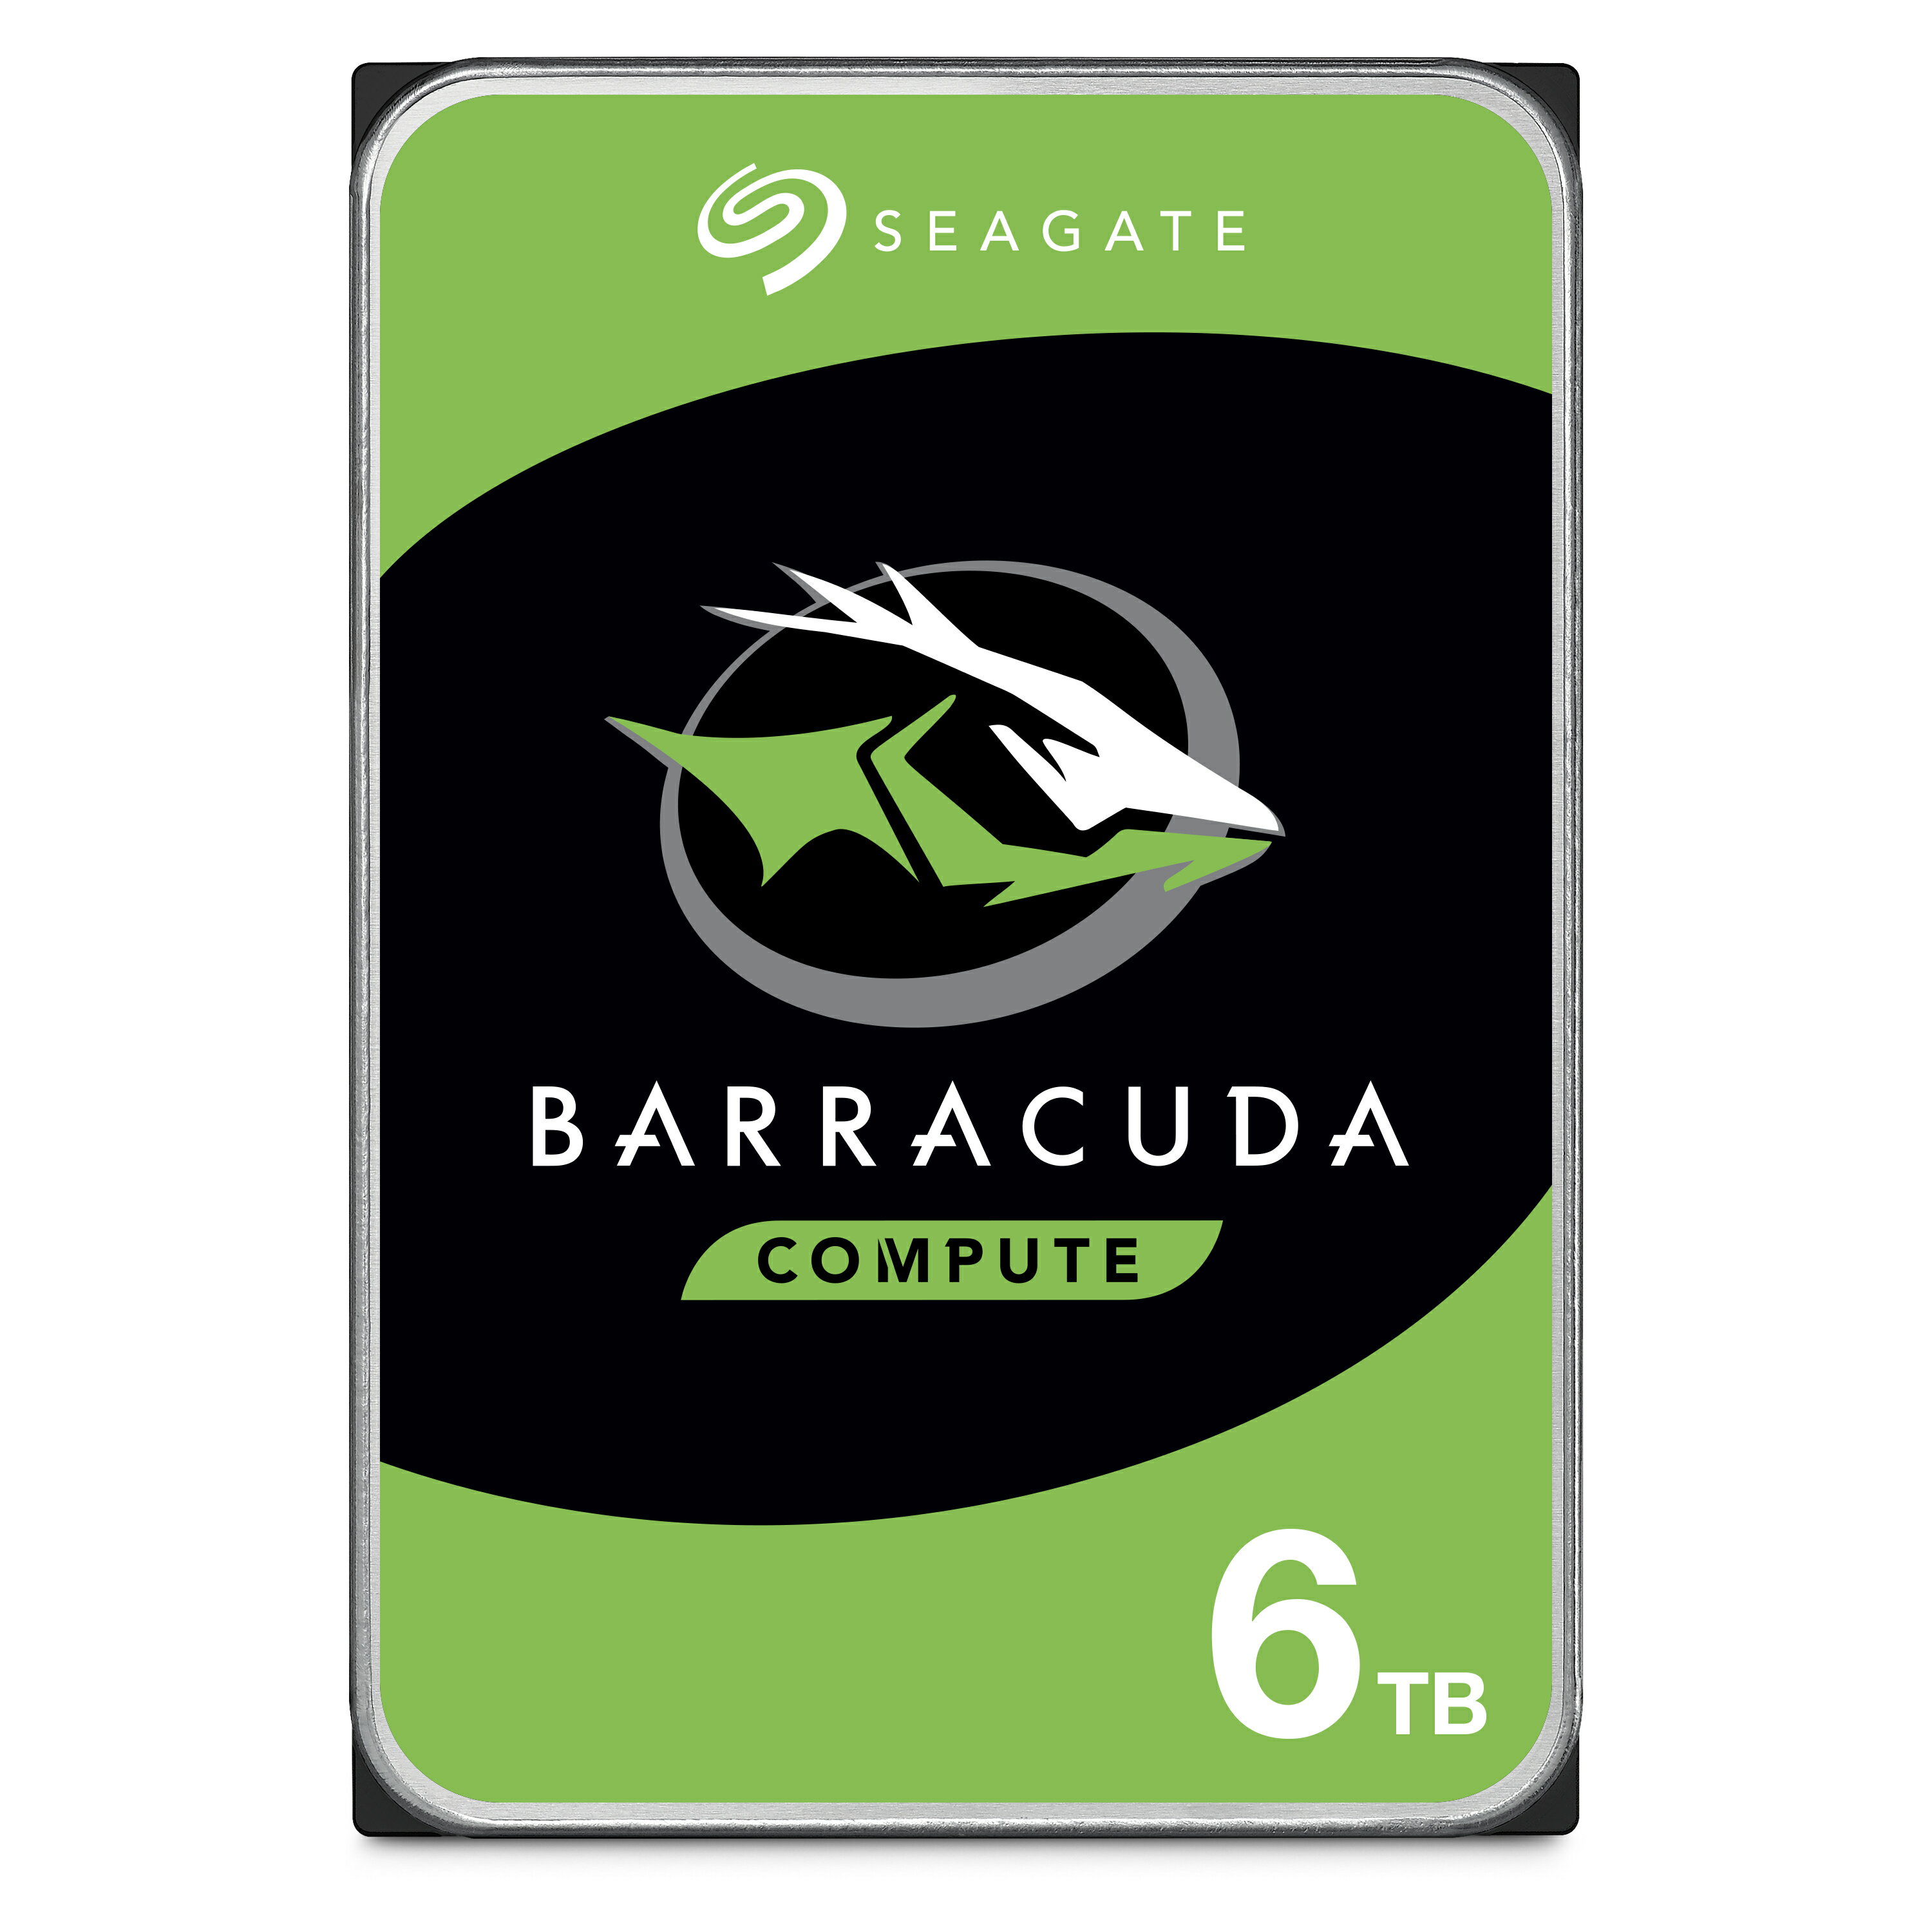 Seagate シーゲイト BarraCuda 3.5インチ <strong>6TB</strong> 内蔵 <strong>ハードディスク</strong> HDD PC 2年保証 6Gb/s 256MB 5400rpm 正規代理店品 ST6000DM003